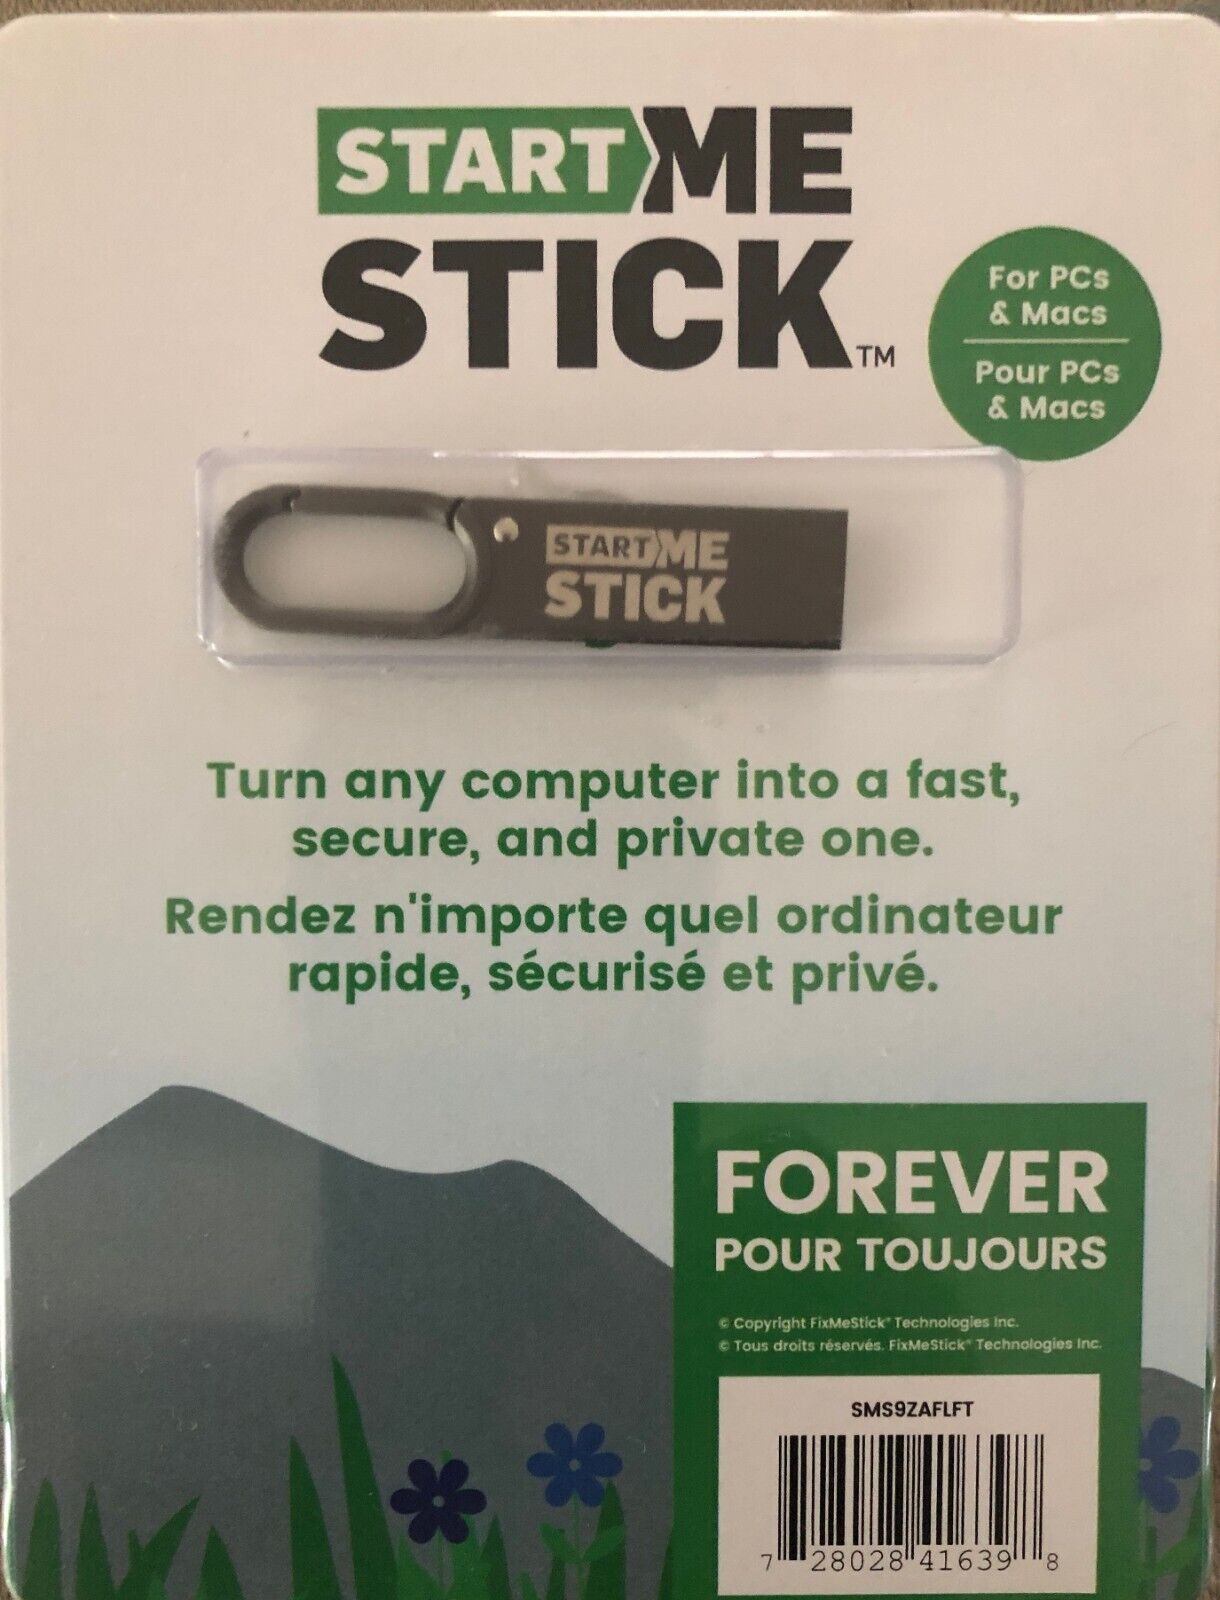 STARTME STICK FOREVER UNLIMITED PC/MAC - BRAND NEW/SEALED